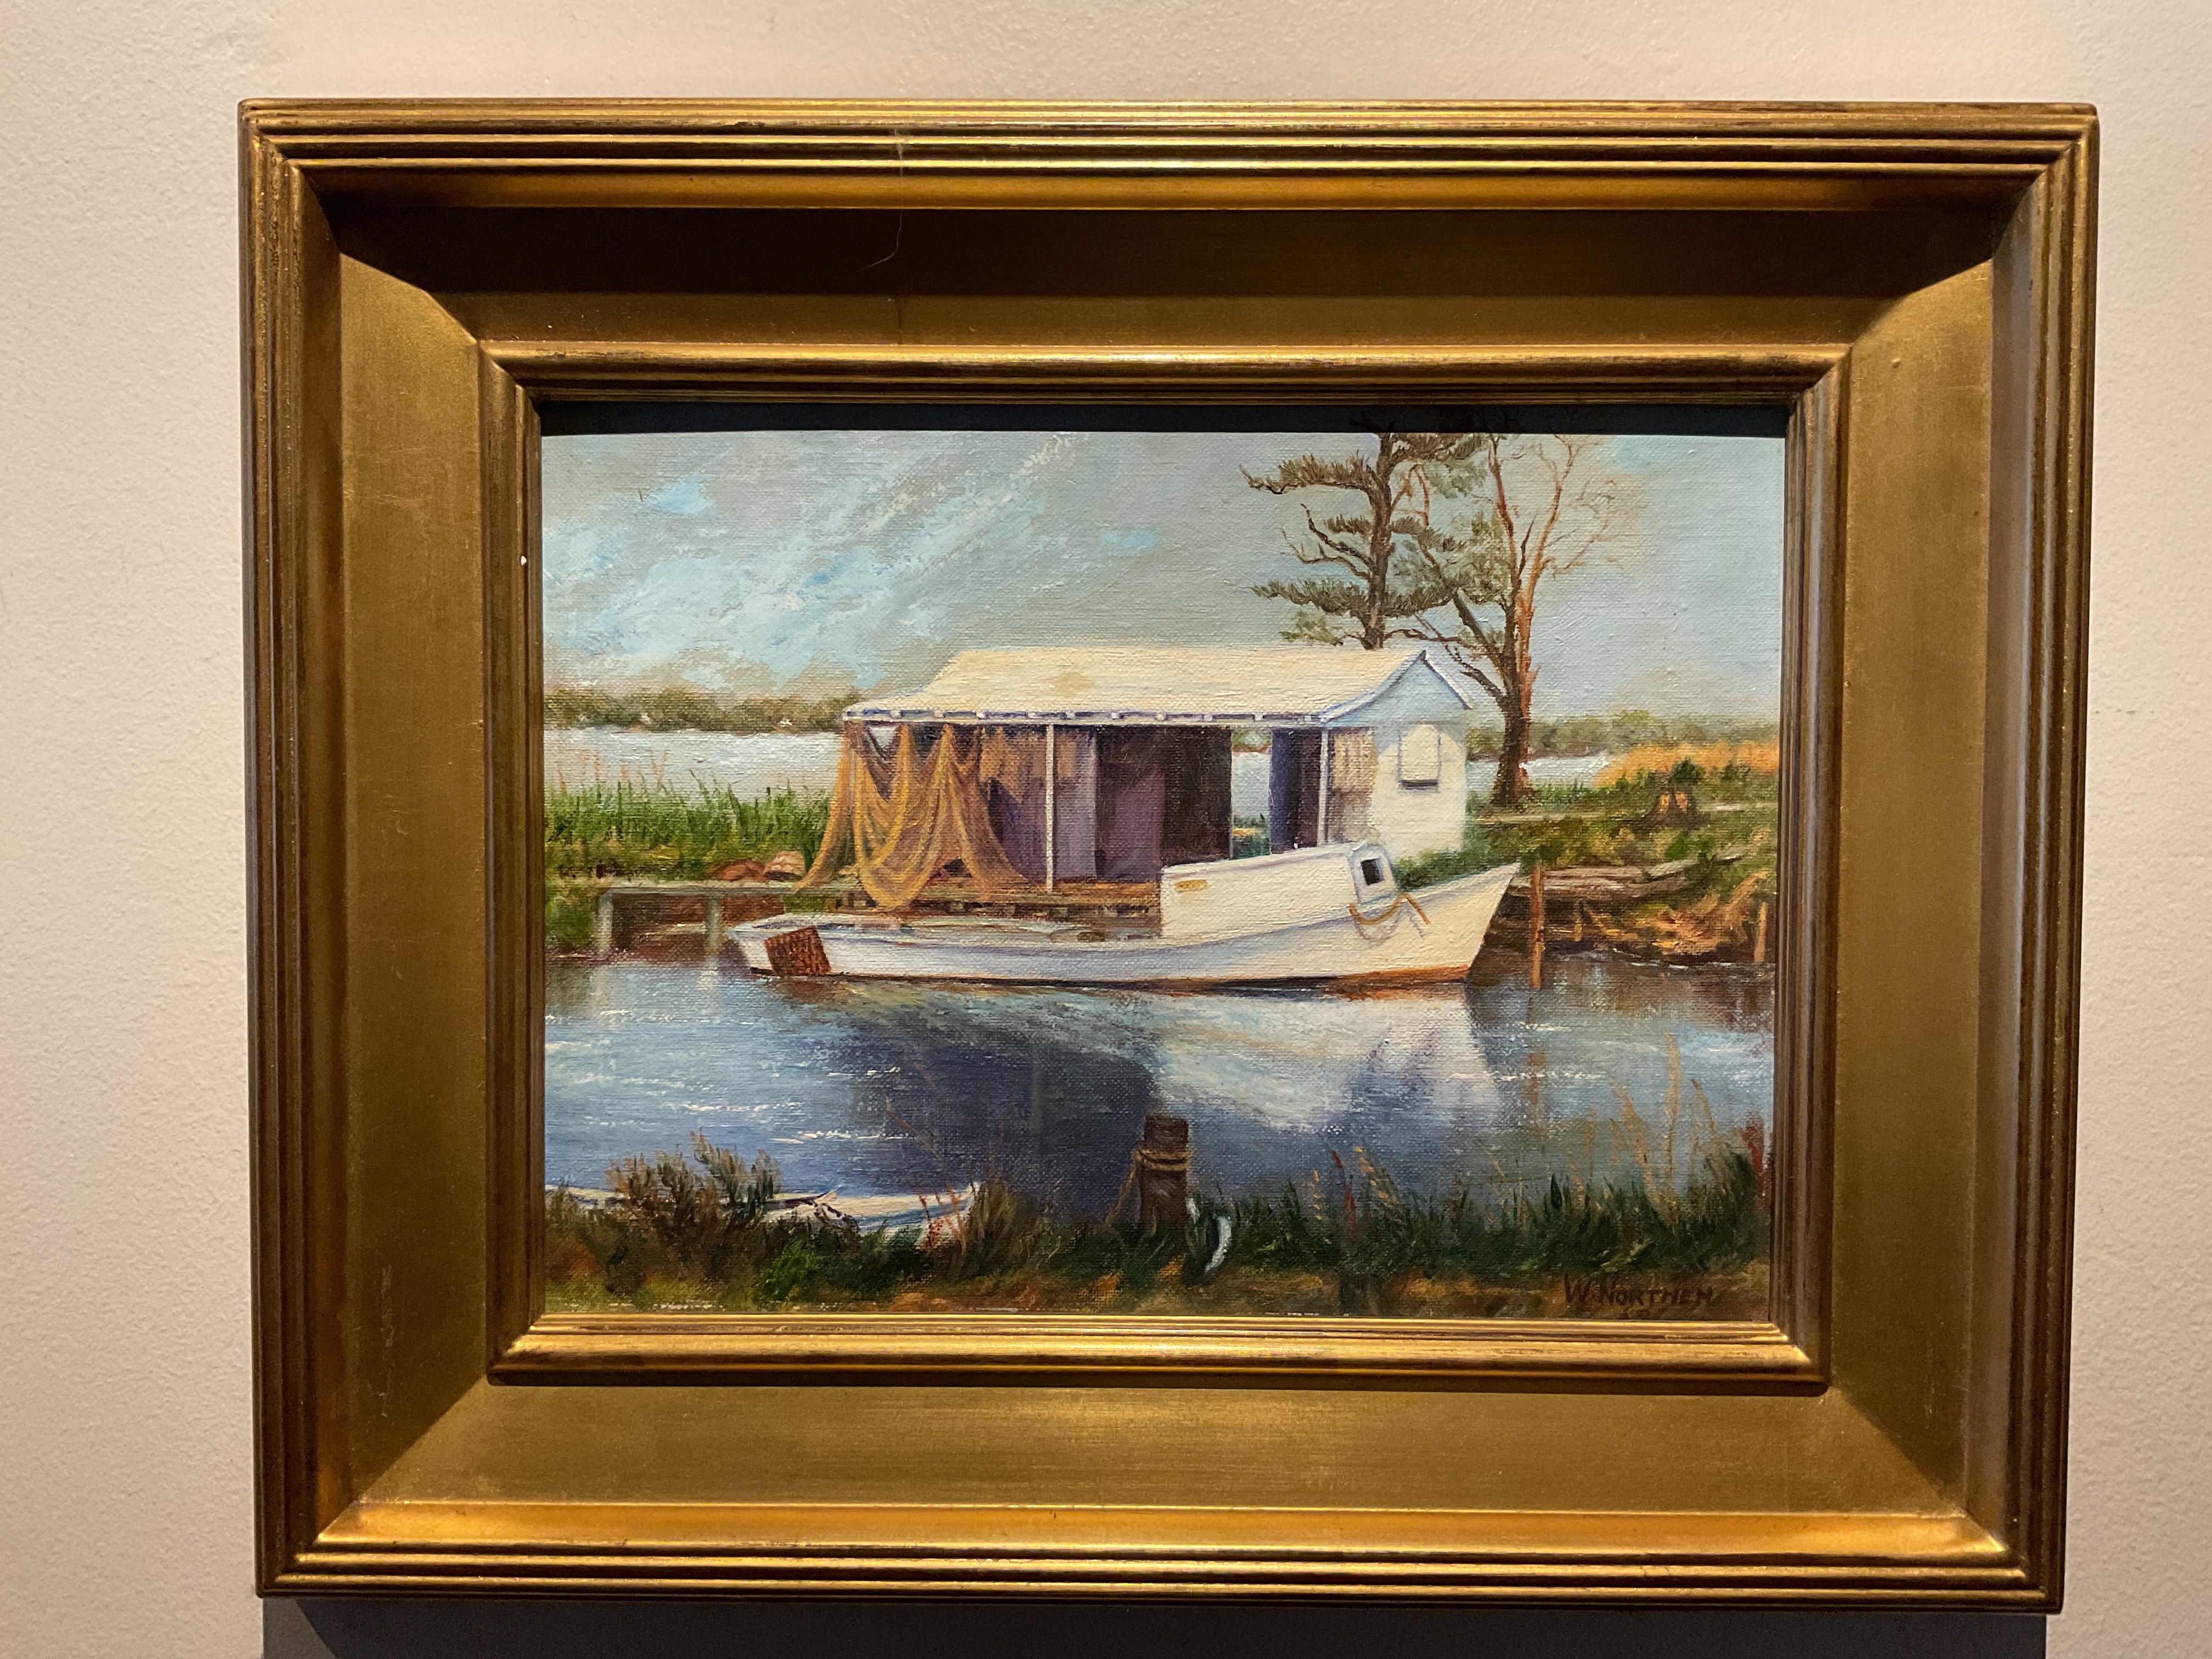 Artist Winifred Northern created this tranquil maritime scene around 1950. It depicts a fishing boat docked alongside a fishing shack with drying nets.  There is something about the landscape that suggests the South, perhaps the Gulf Coast.  The